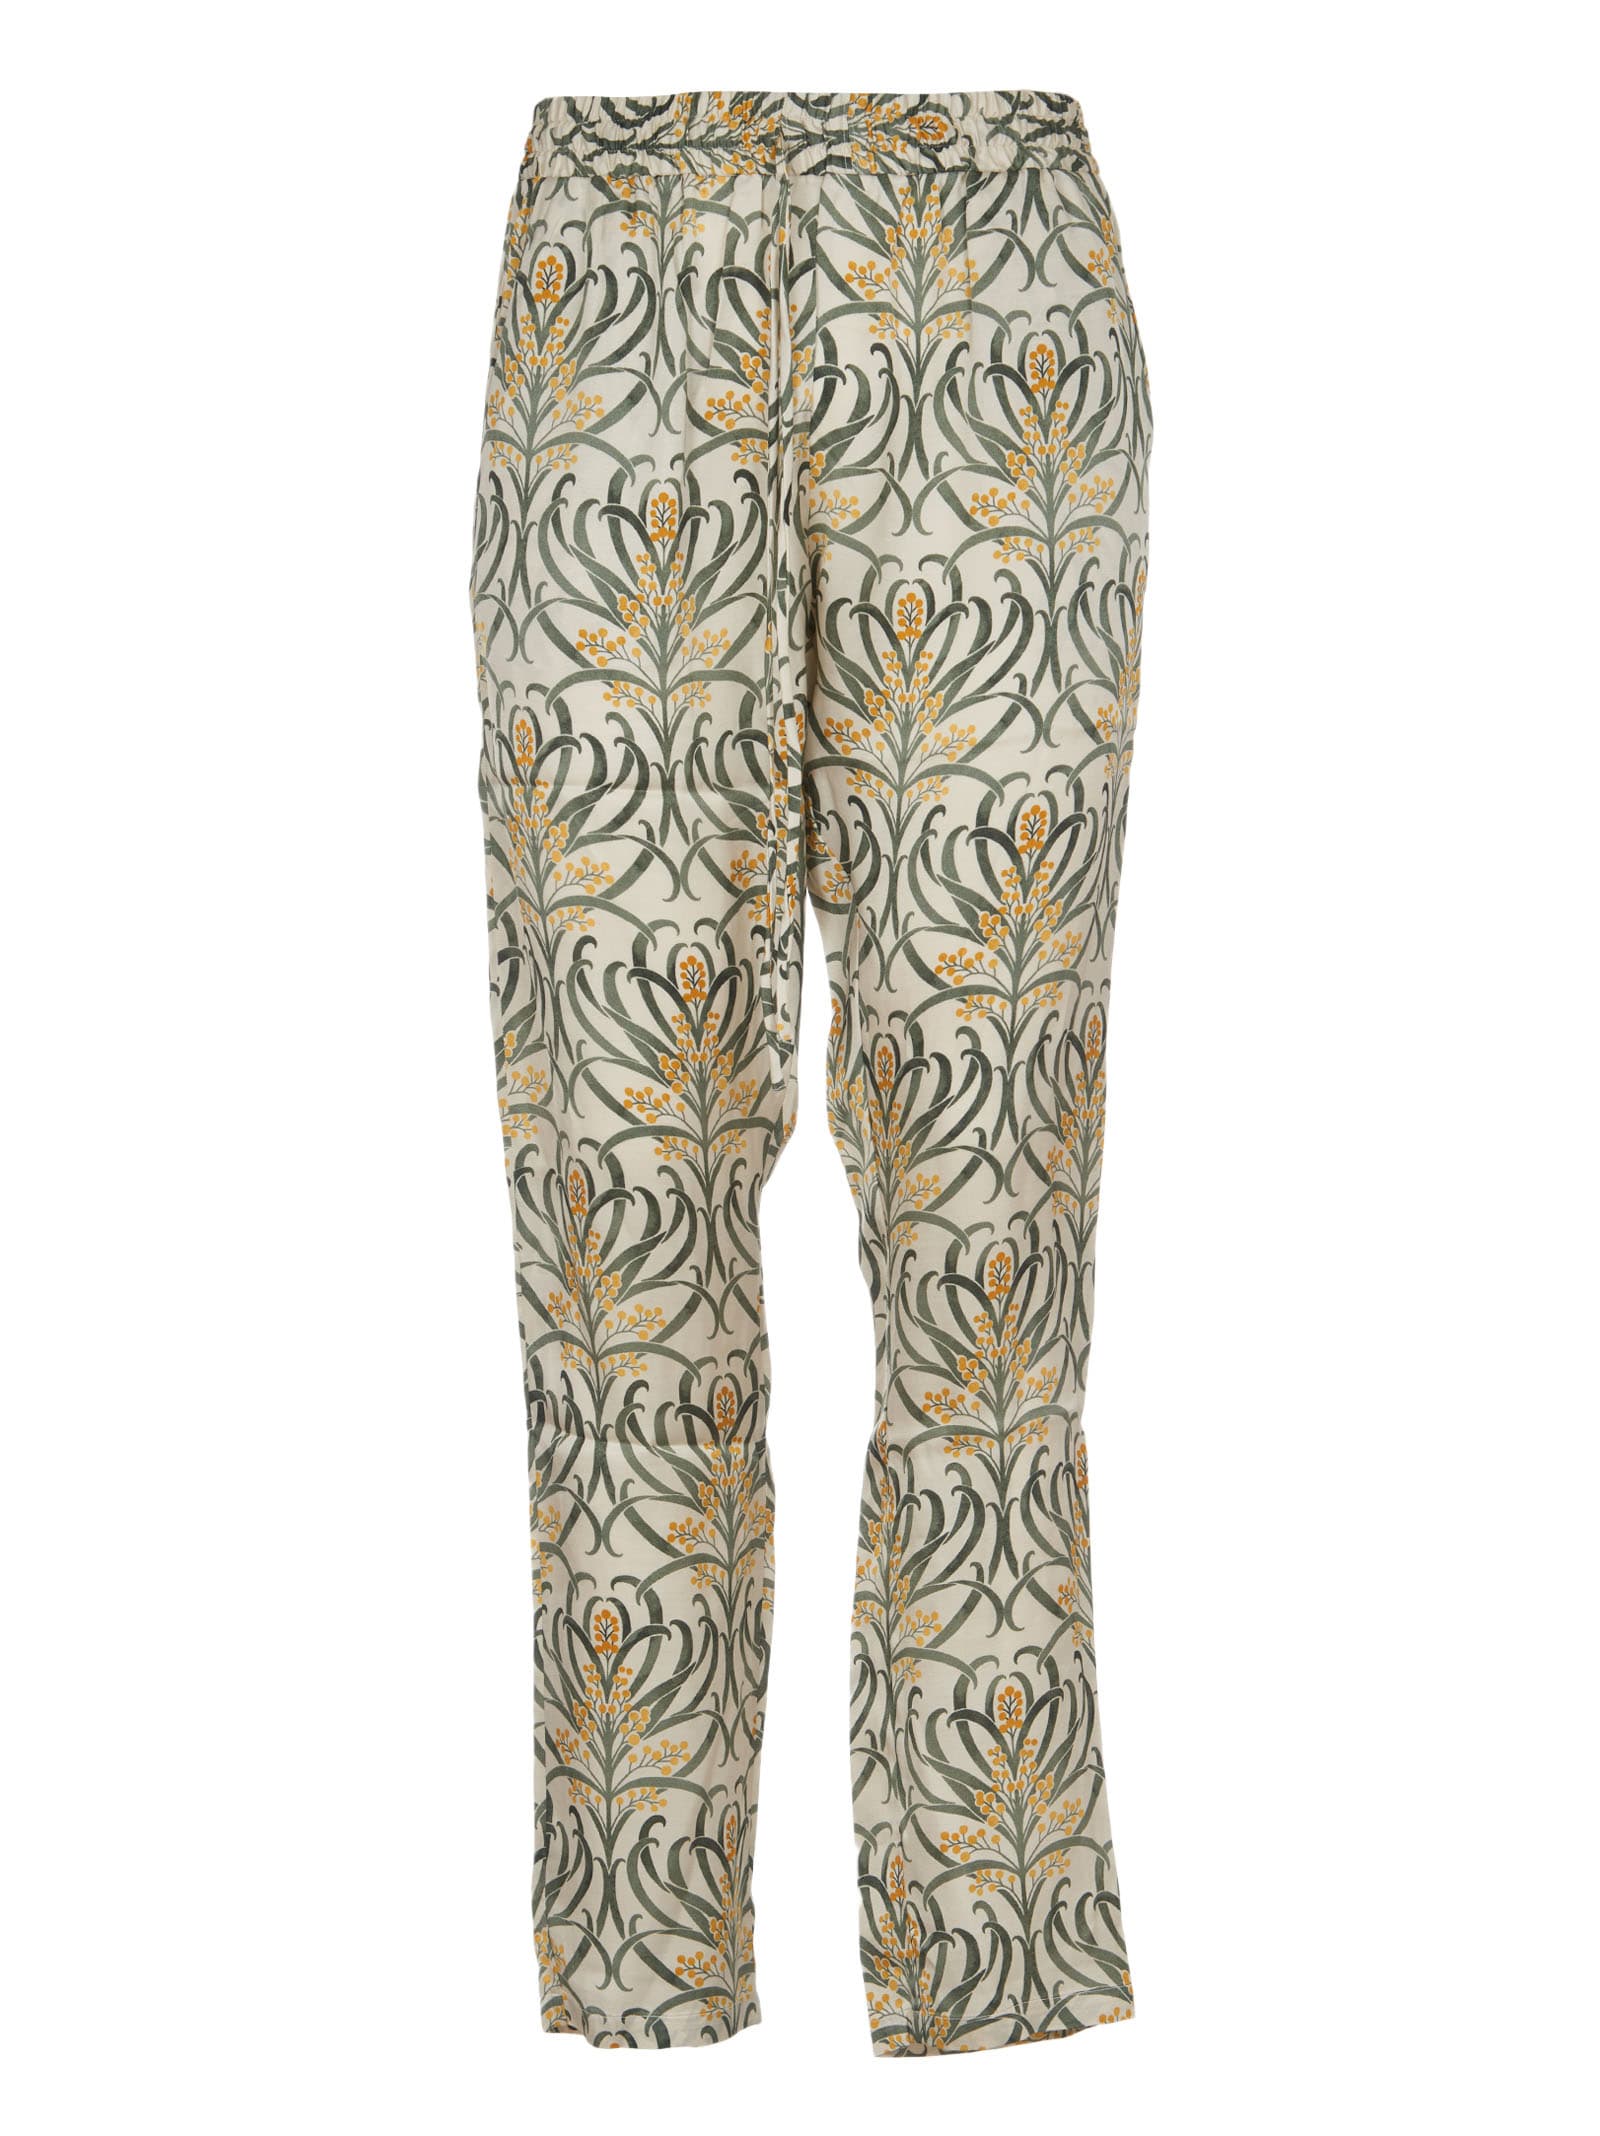 Mouty Floral Print Trousers